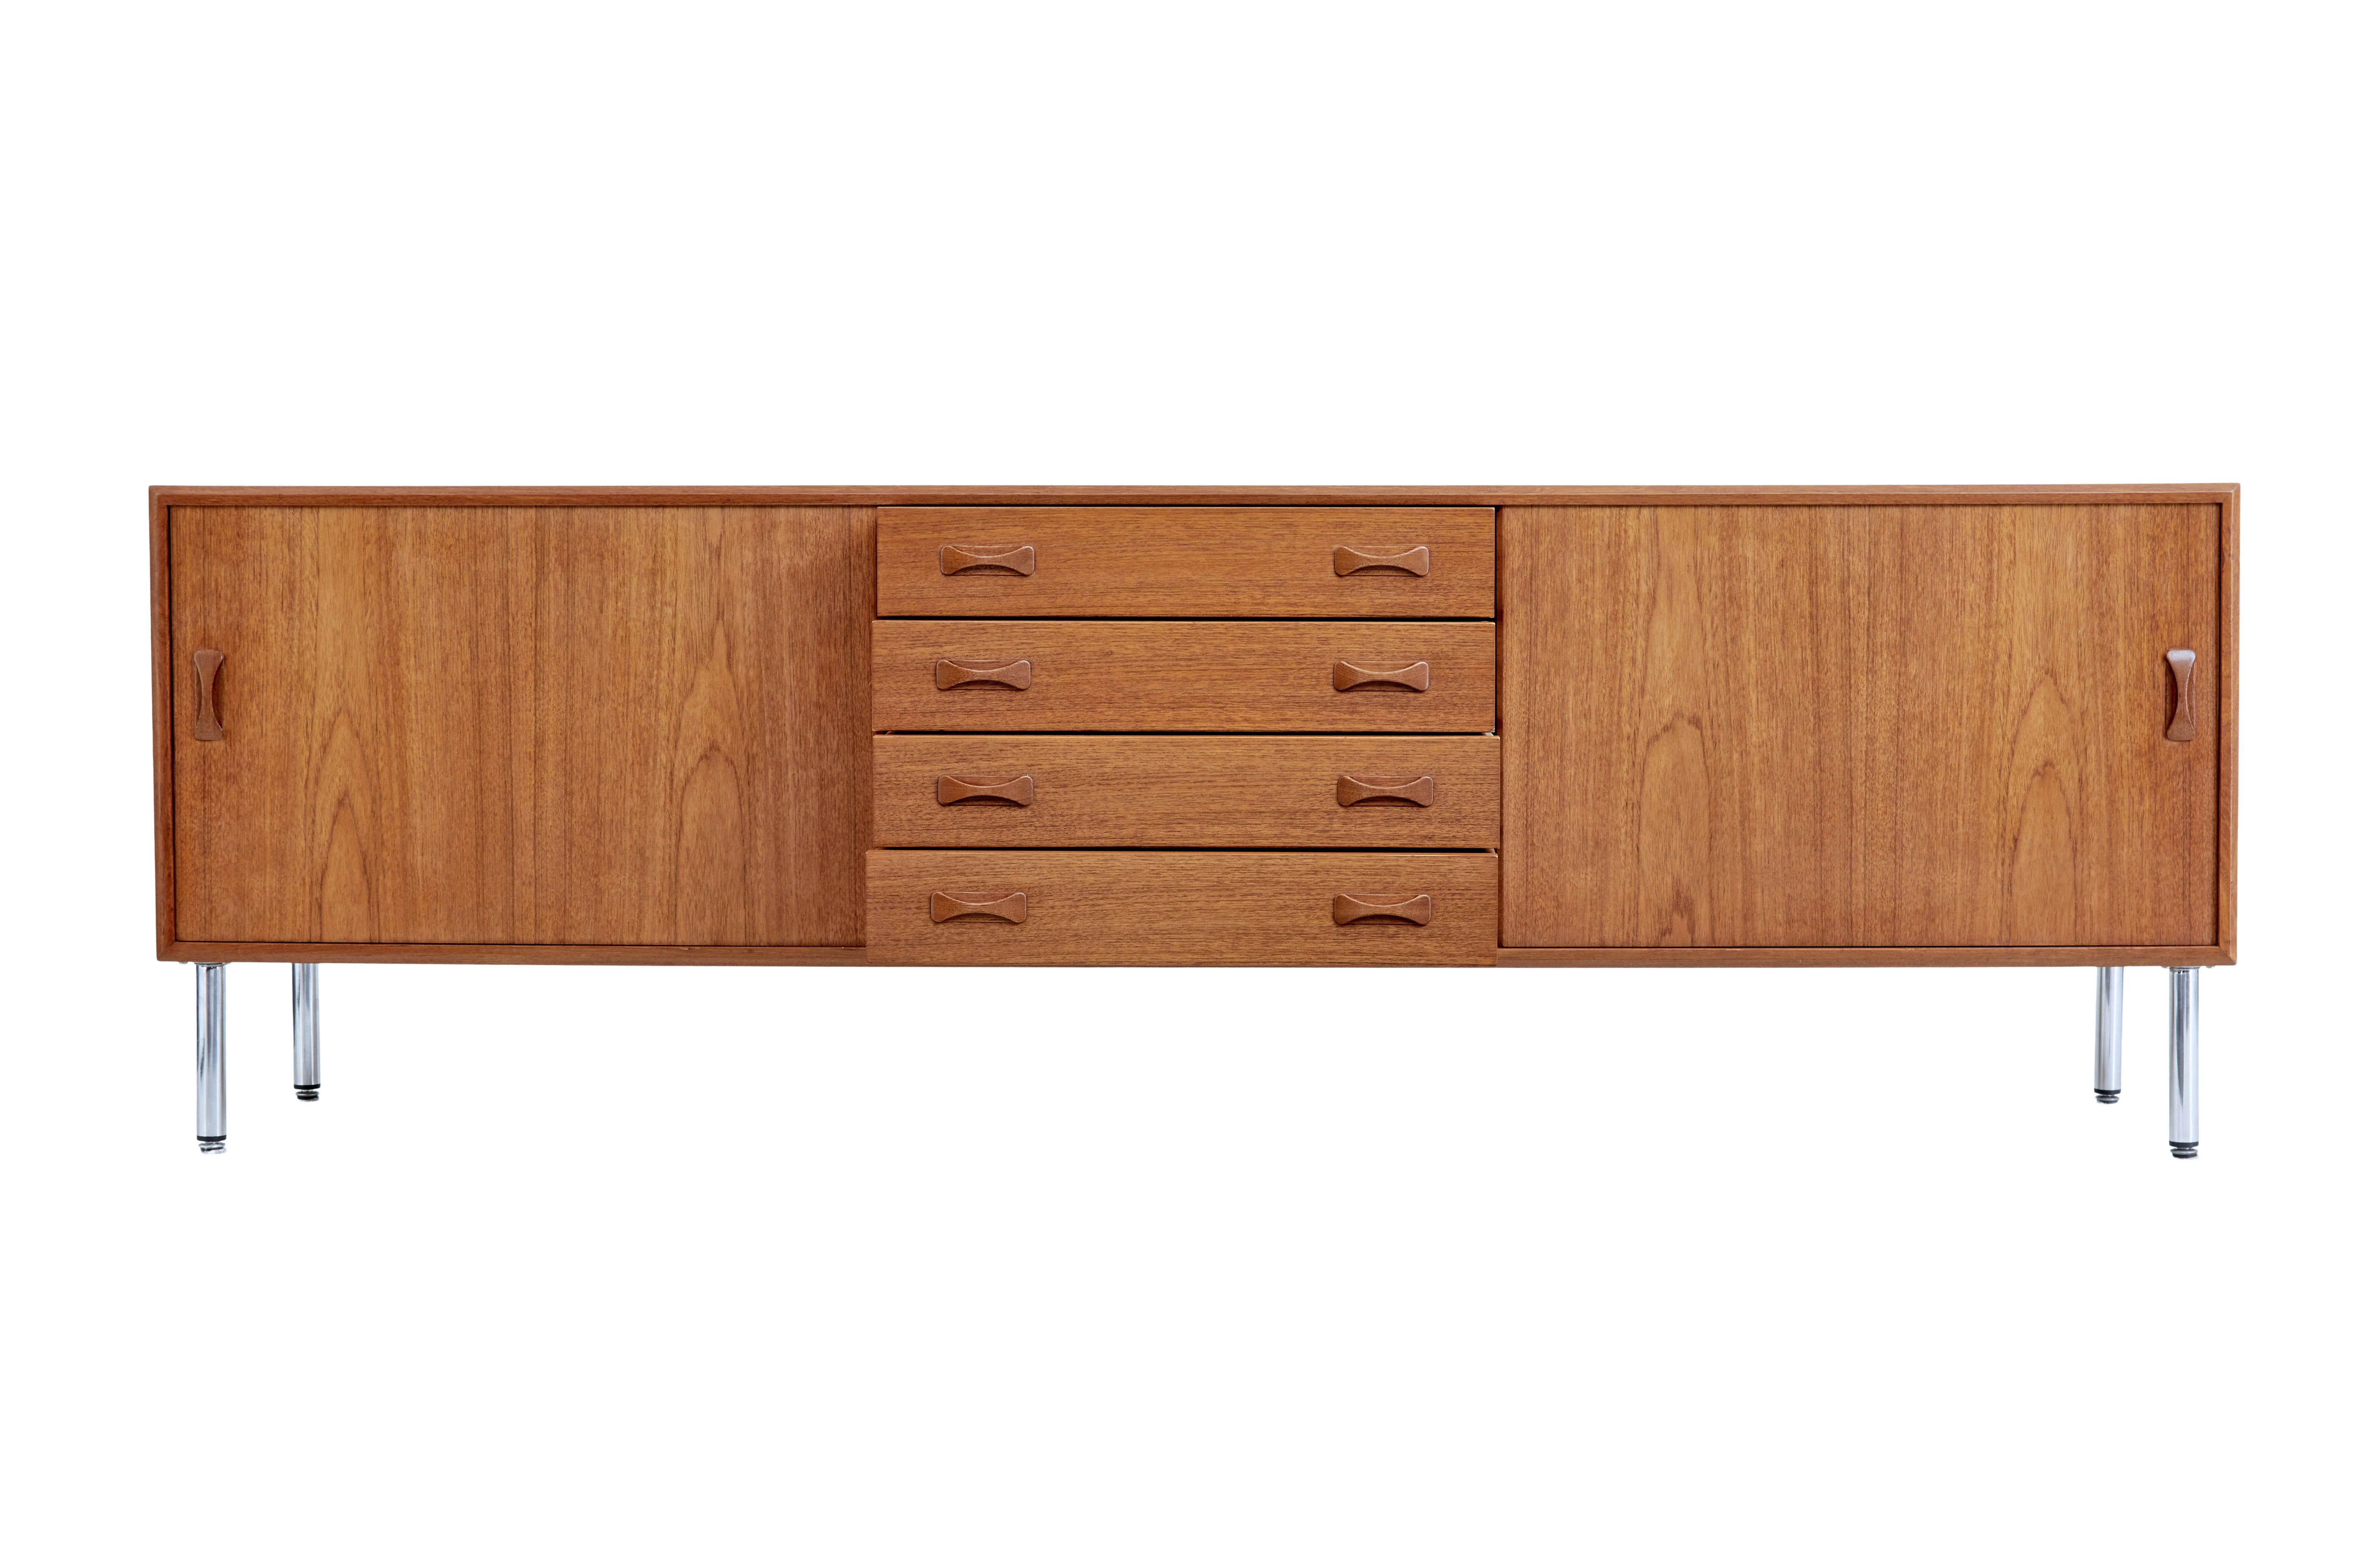 Mid-20th century Danish teak sideboard by Clausen & Sons, circa 1960.

Good quality Danish teak sideboard by Danish makers Clausen & Sons, circa 1960. Central bank of 4 drawers, flanked either side by a sliding door to reveal a single shelf. Good